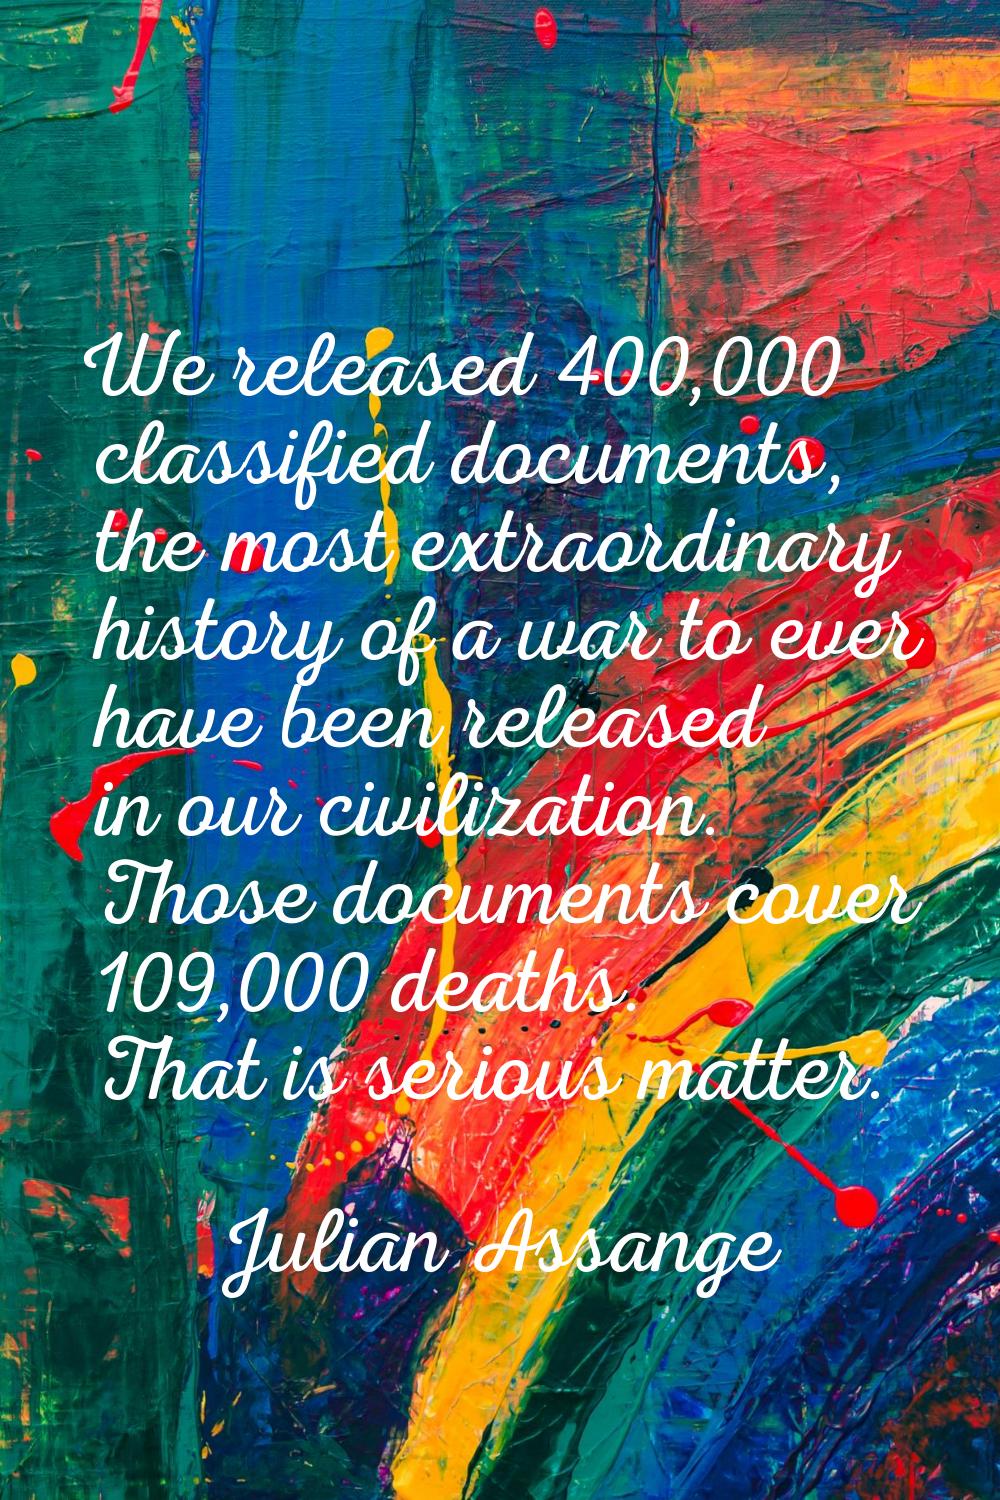 We released 400,000 classified documents, the most extraordinary history of a war to ever have been